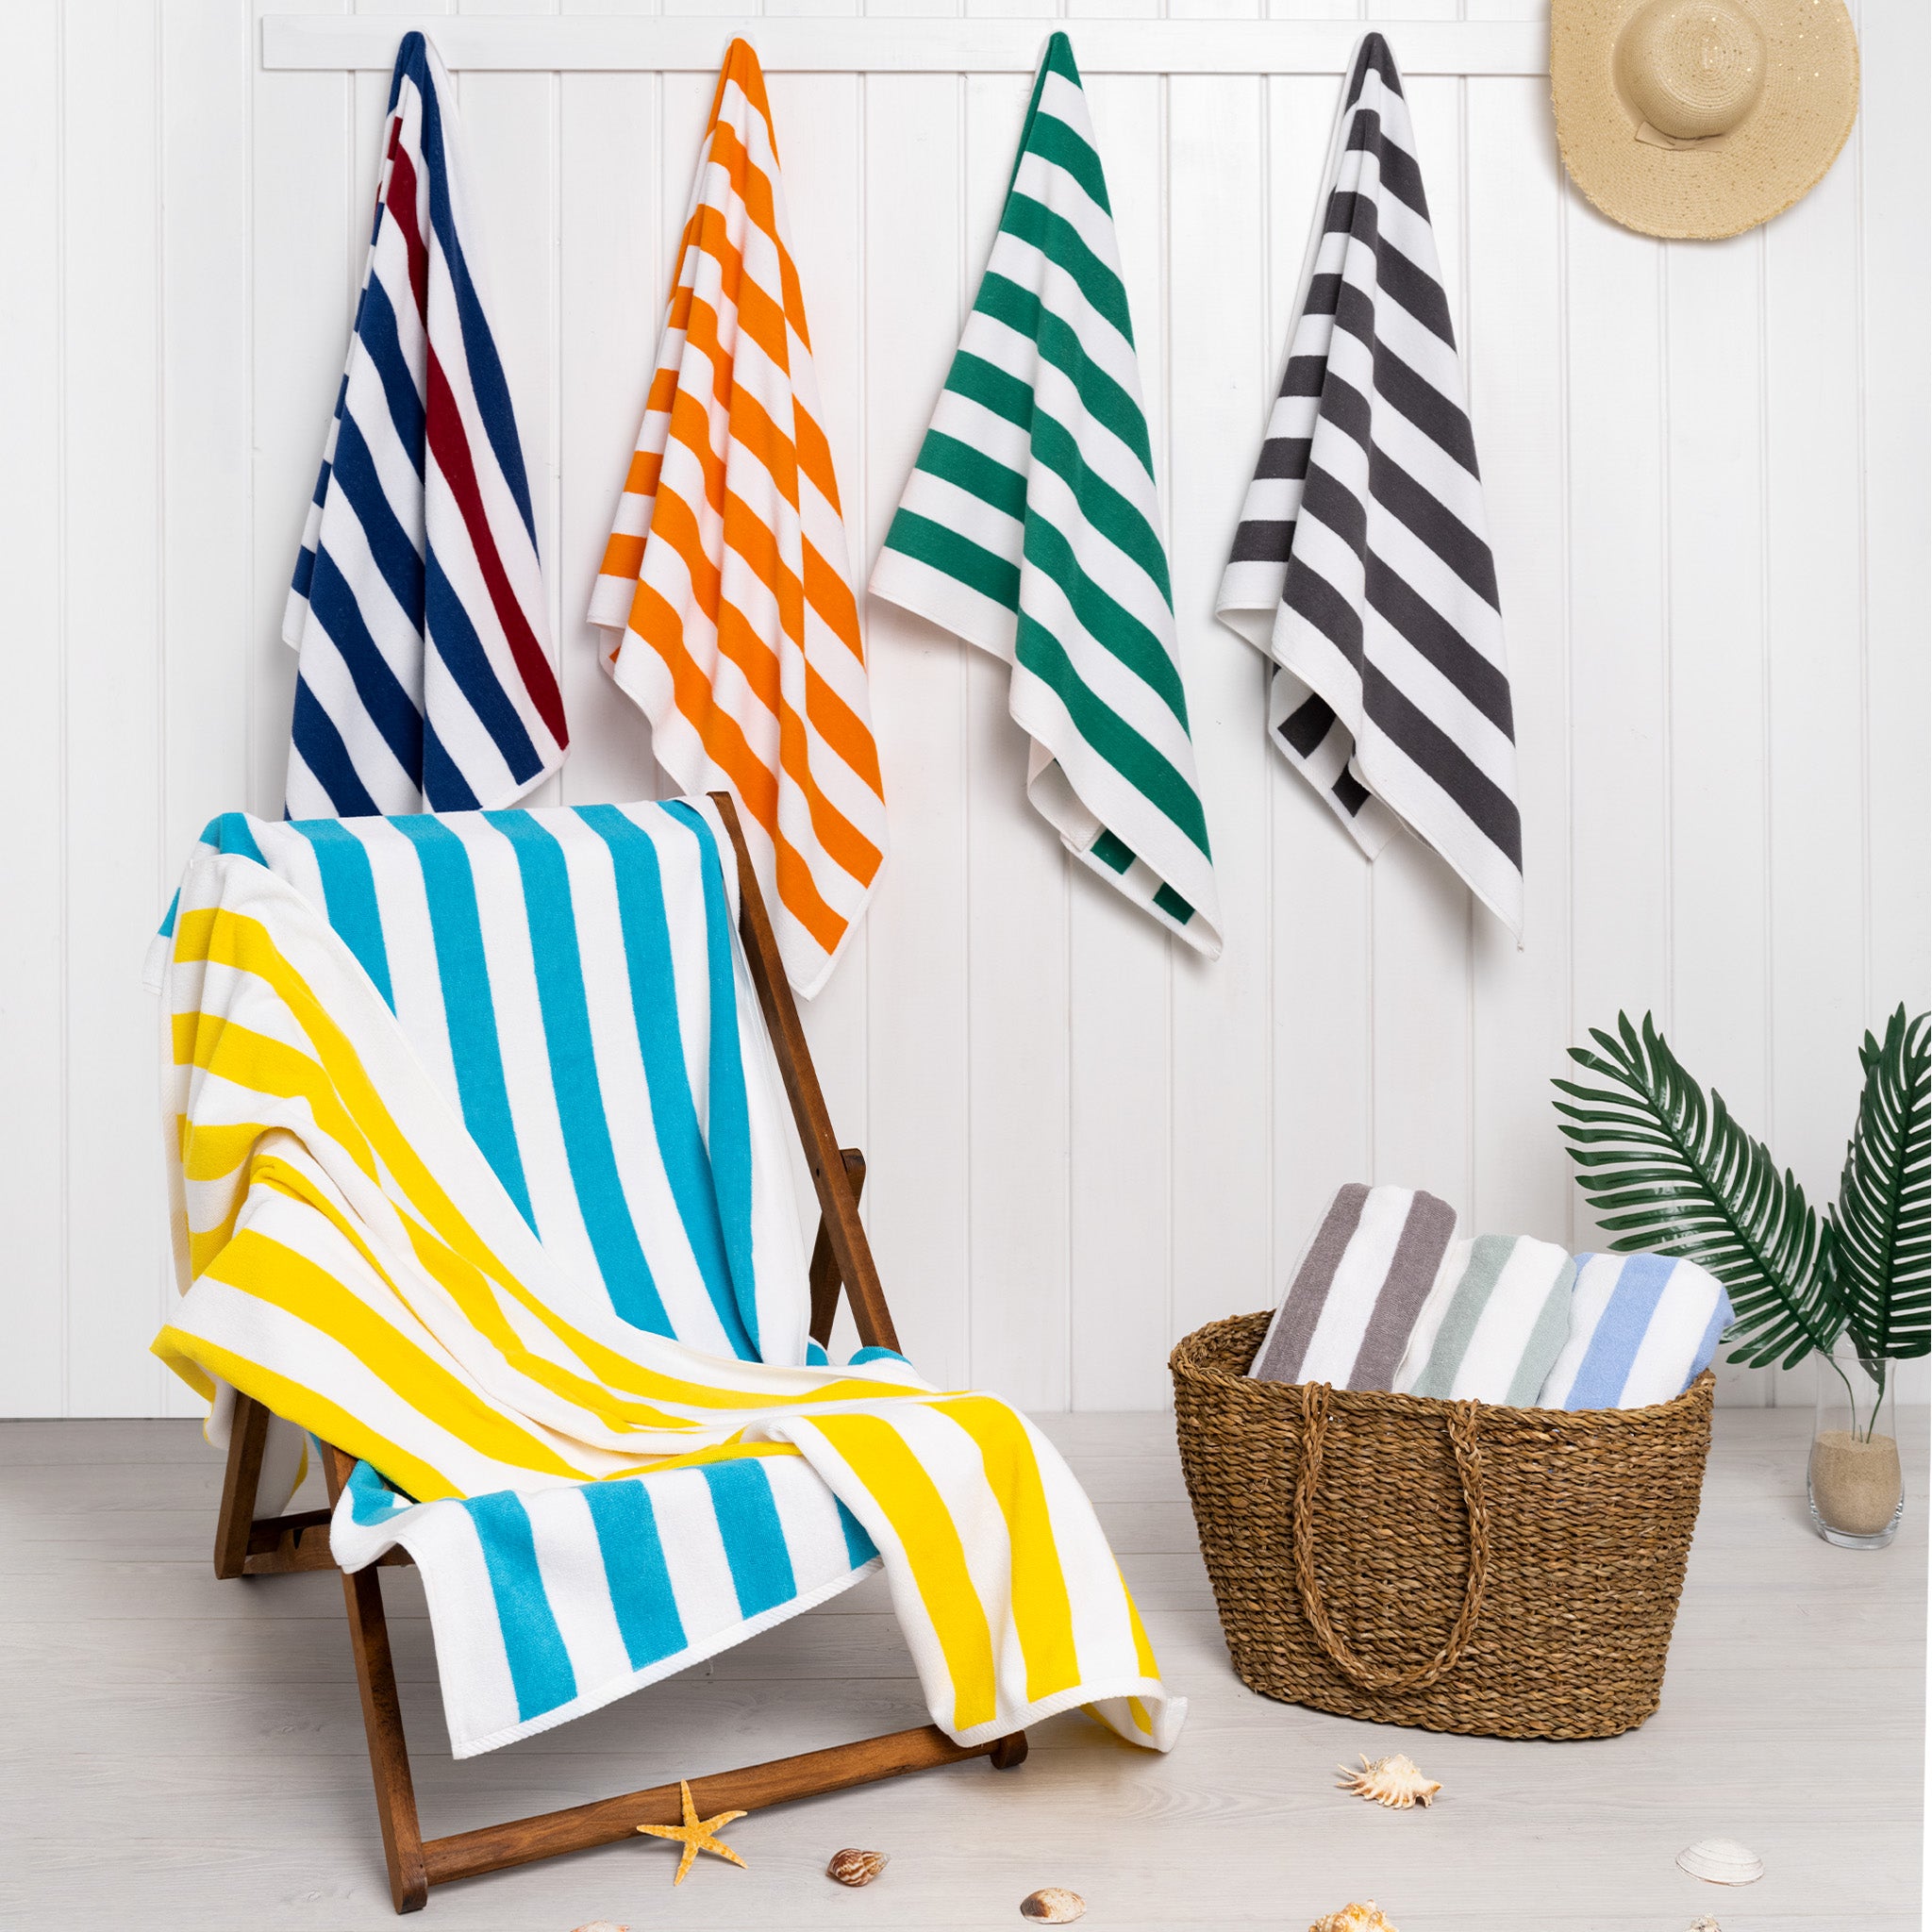 American Soft Linen 100% Cotton 4 Pack Beach Towels Cabana Striped Pool Towels -mint-8